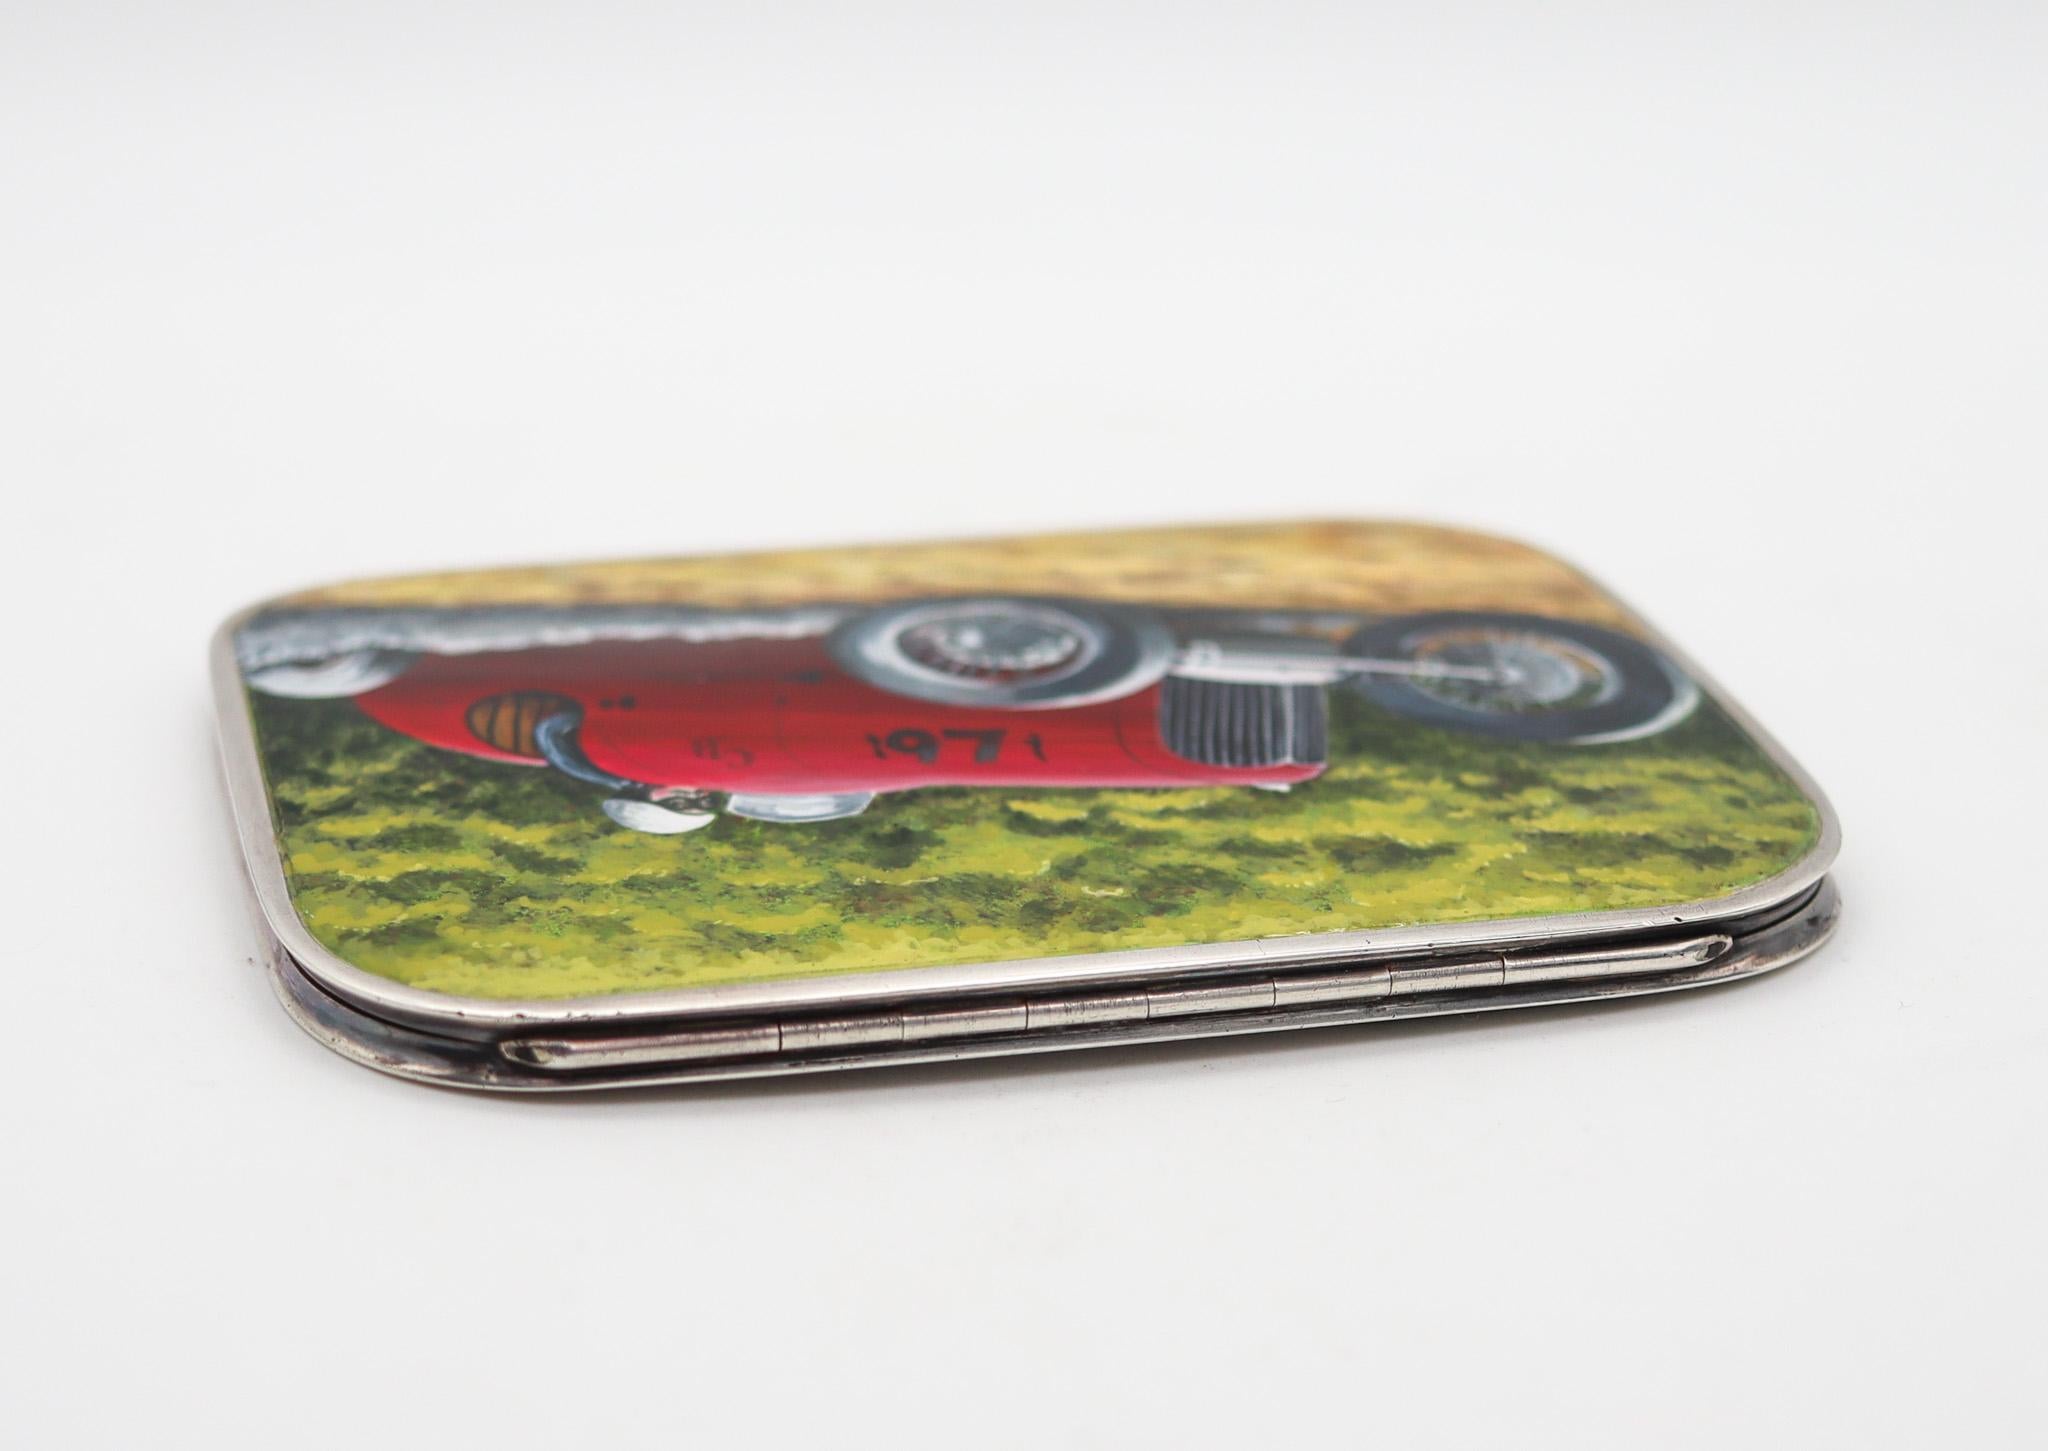 Finnigans 1932 London Art Deco Enamel Case Box With Racing Car In .925 Sterling  In Excellent Condition For Sale In Miami, FL